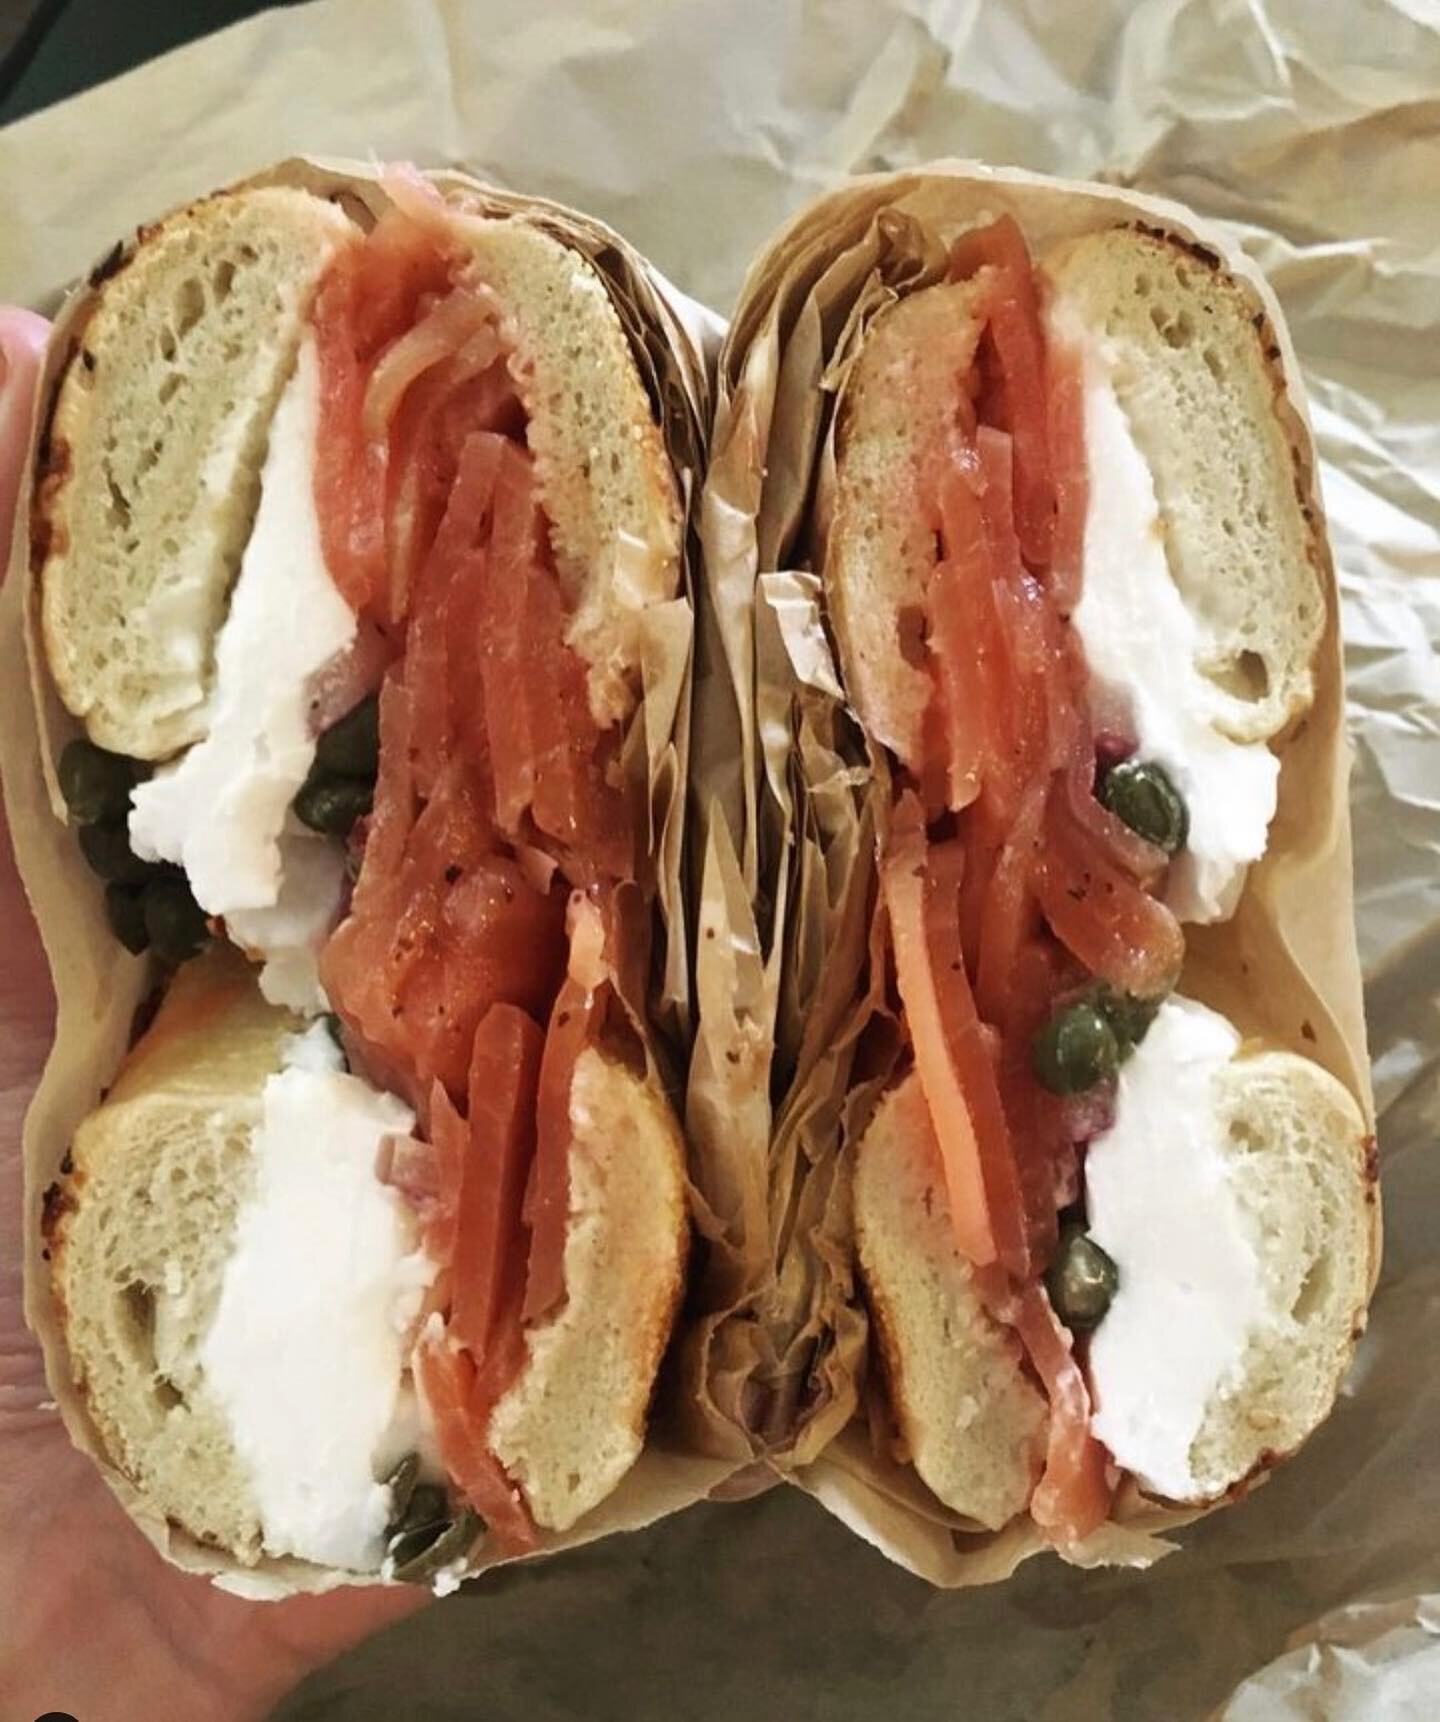 LUHV LOX 🥯A toasted everything bagel topped with smoked golden beets, cream cheese, onions, and capers🍴A menu item exclusive to our Vegan Deli 🥓 @politepowered